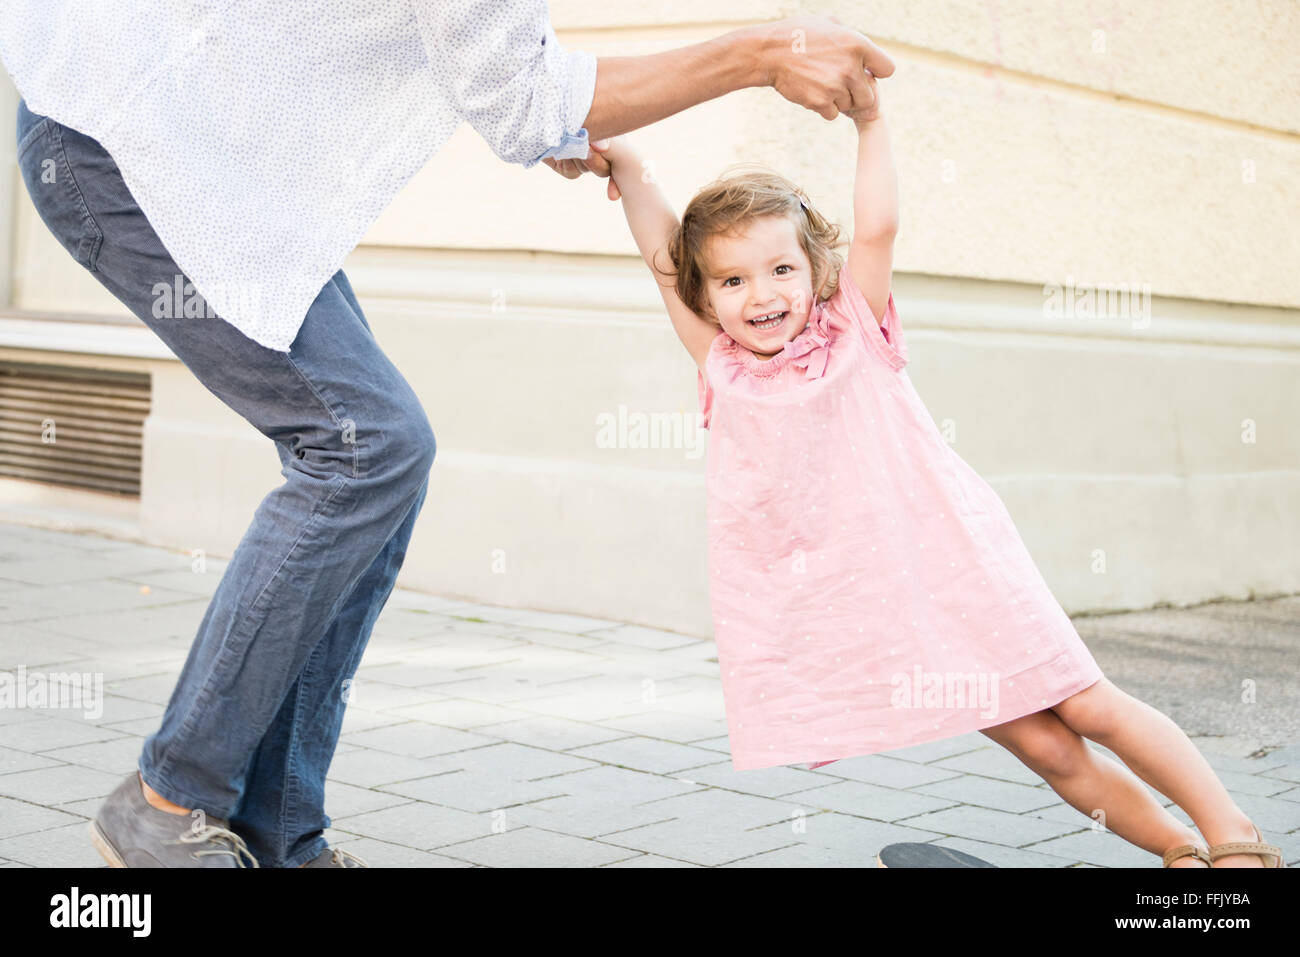 Father and daughter on skateboard Stock Photo